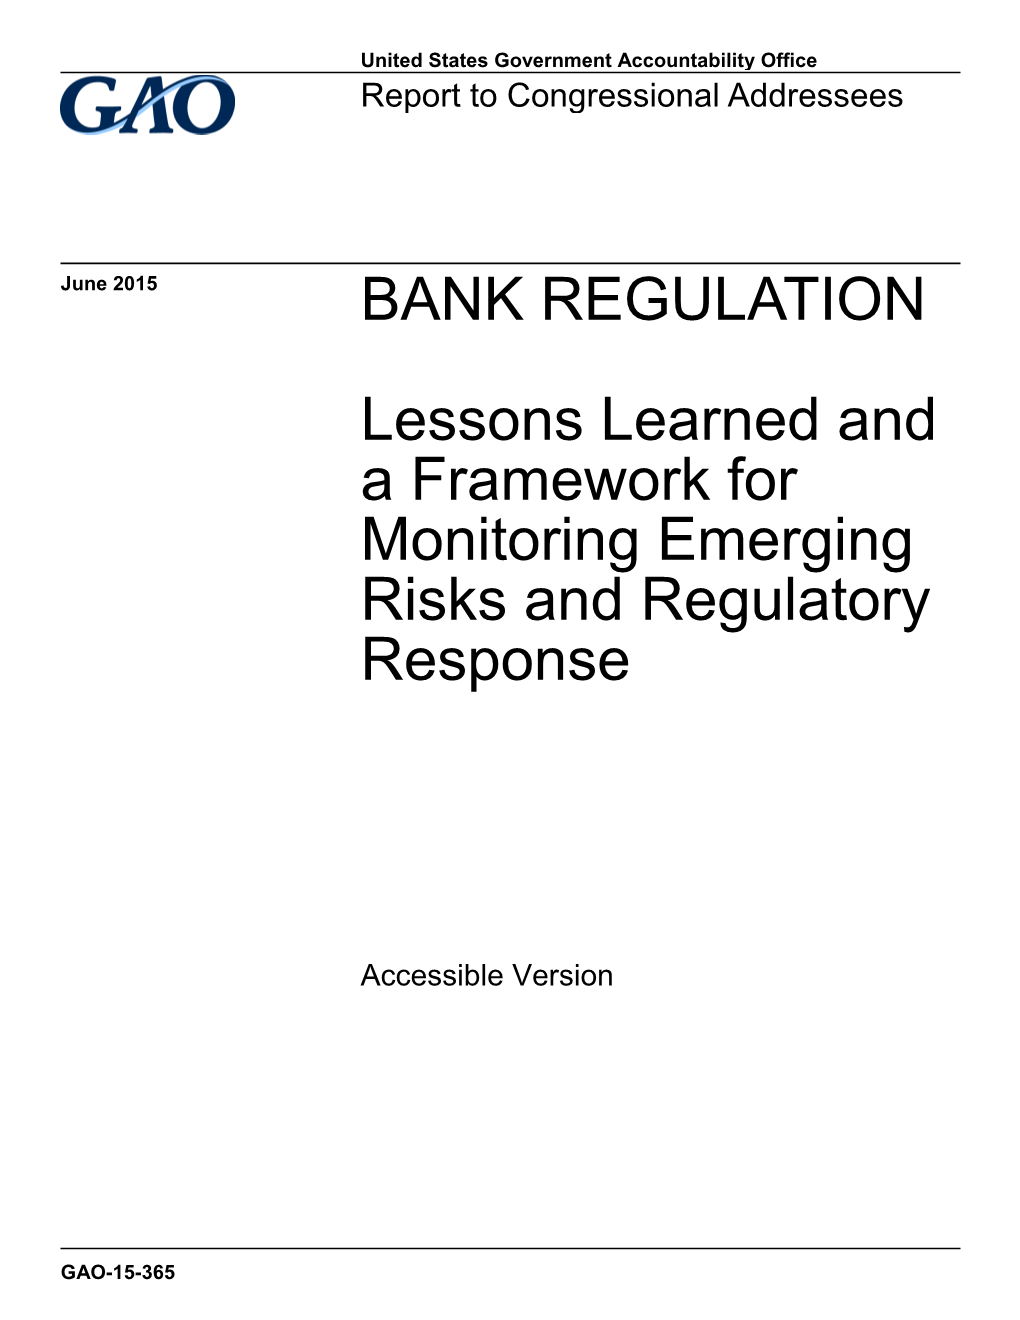 GAO-15-365 Accessible Version, Bank Regulation: Lessons Learned